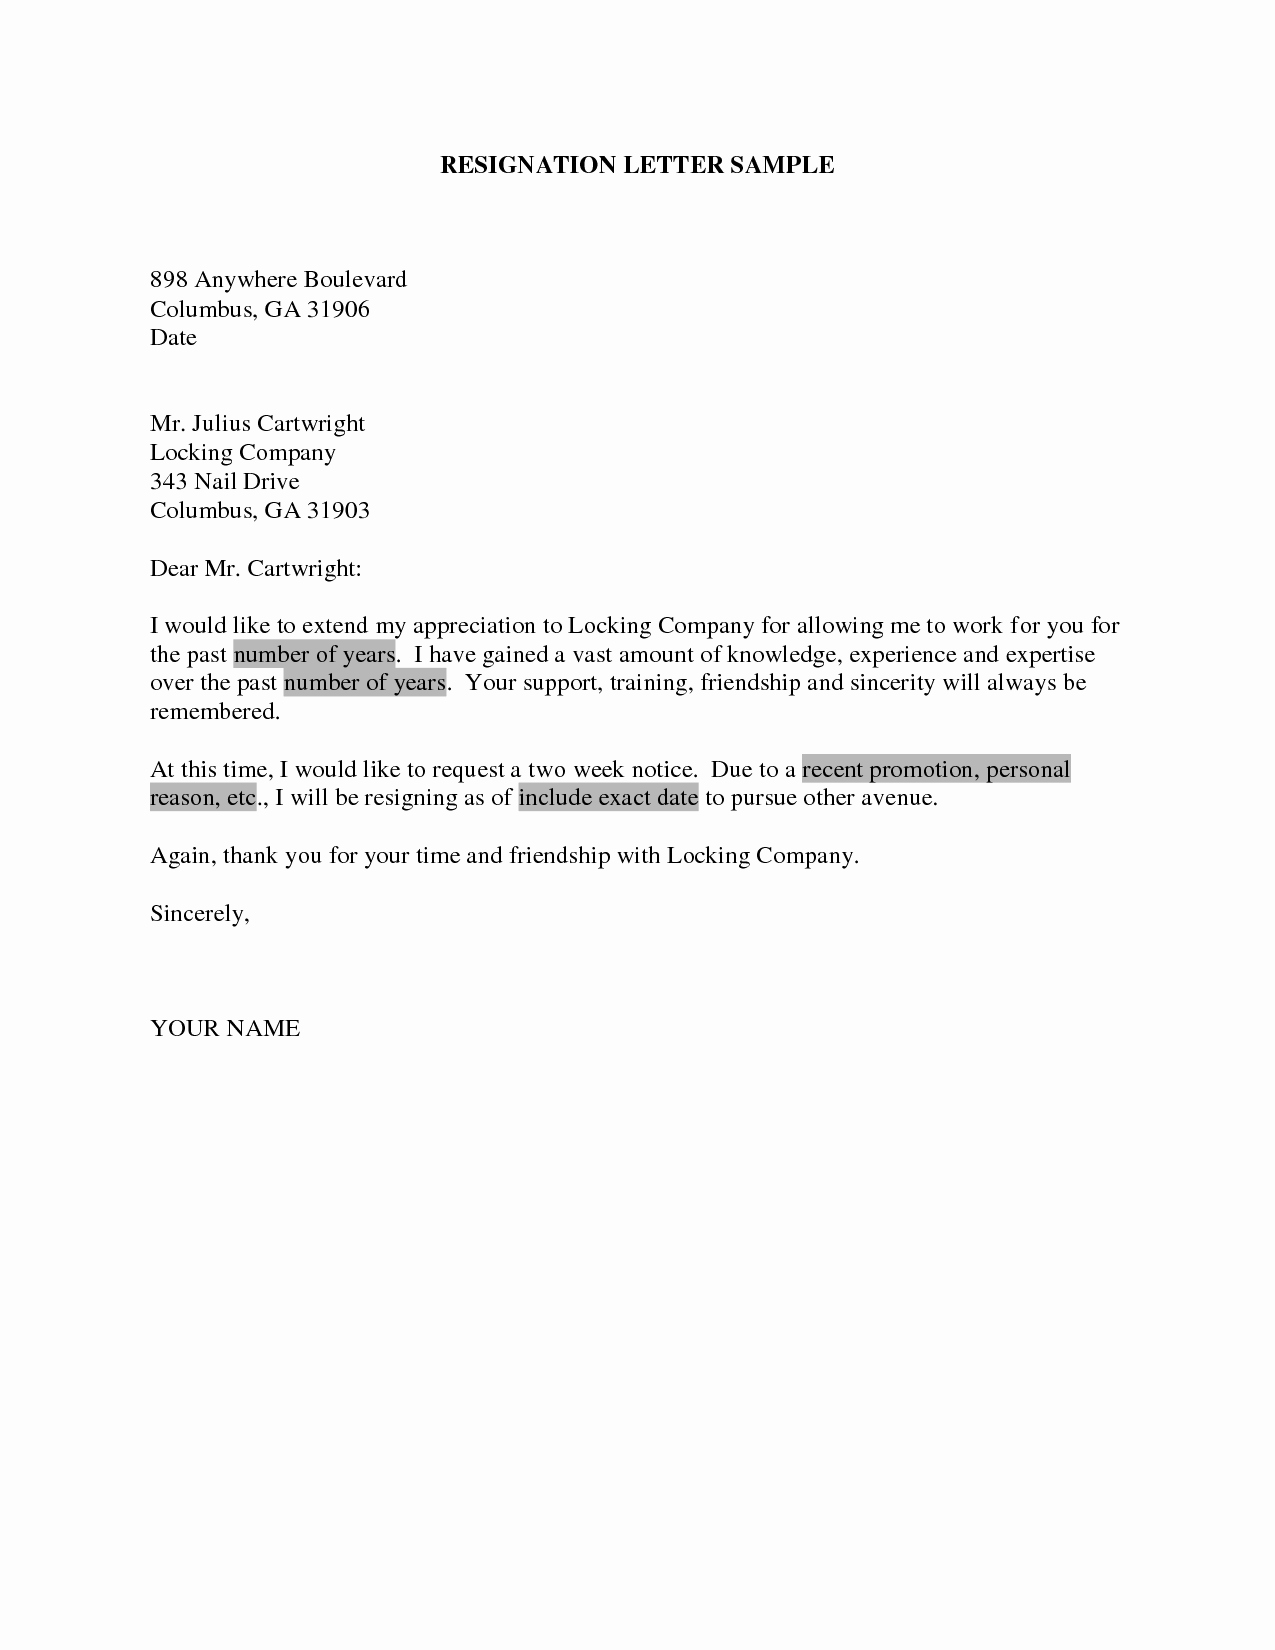 Letter Of Resignation Template Free Inspirational Resignation Letter Due Personal Reasons Resignationwriting